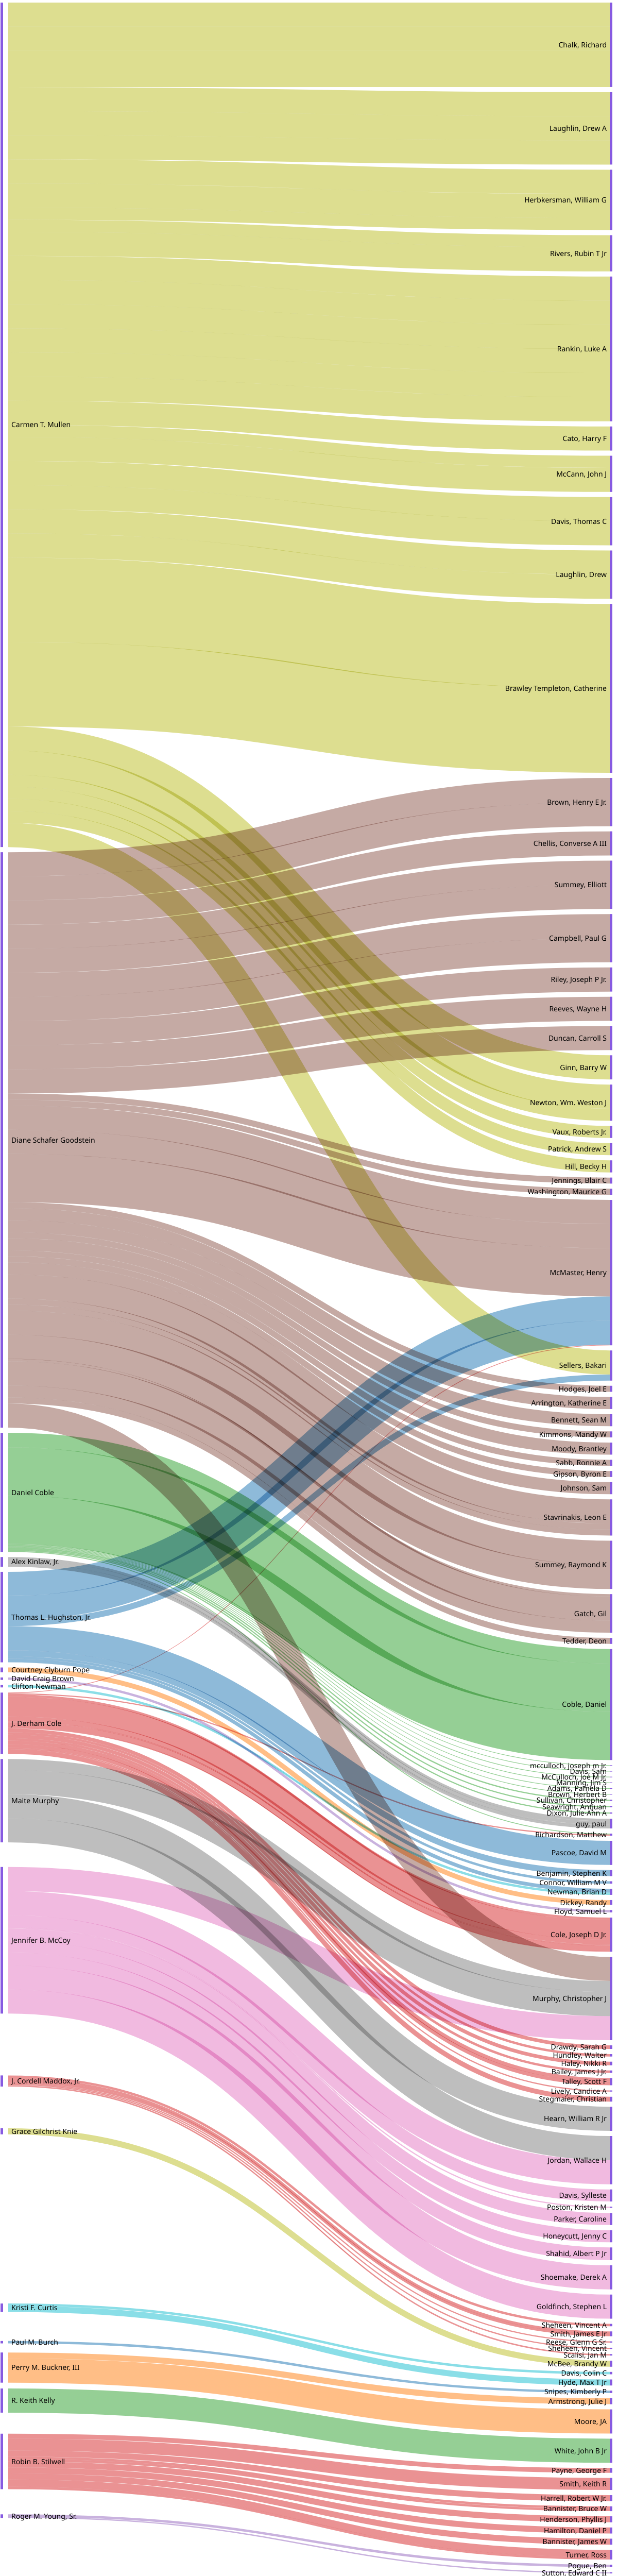 This is a Sankey diagram and it shows the flow of money from judges to candidates. The larger the flow the more money a judge contributed to a candidate